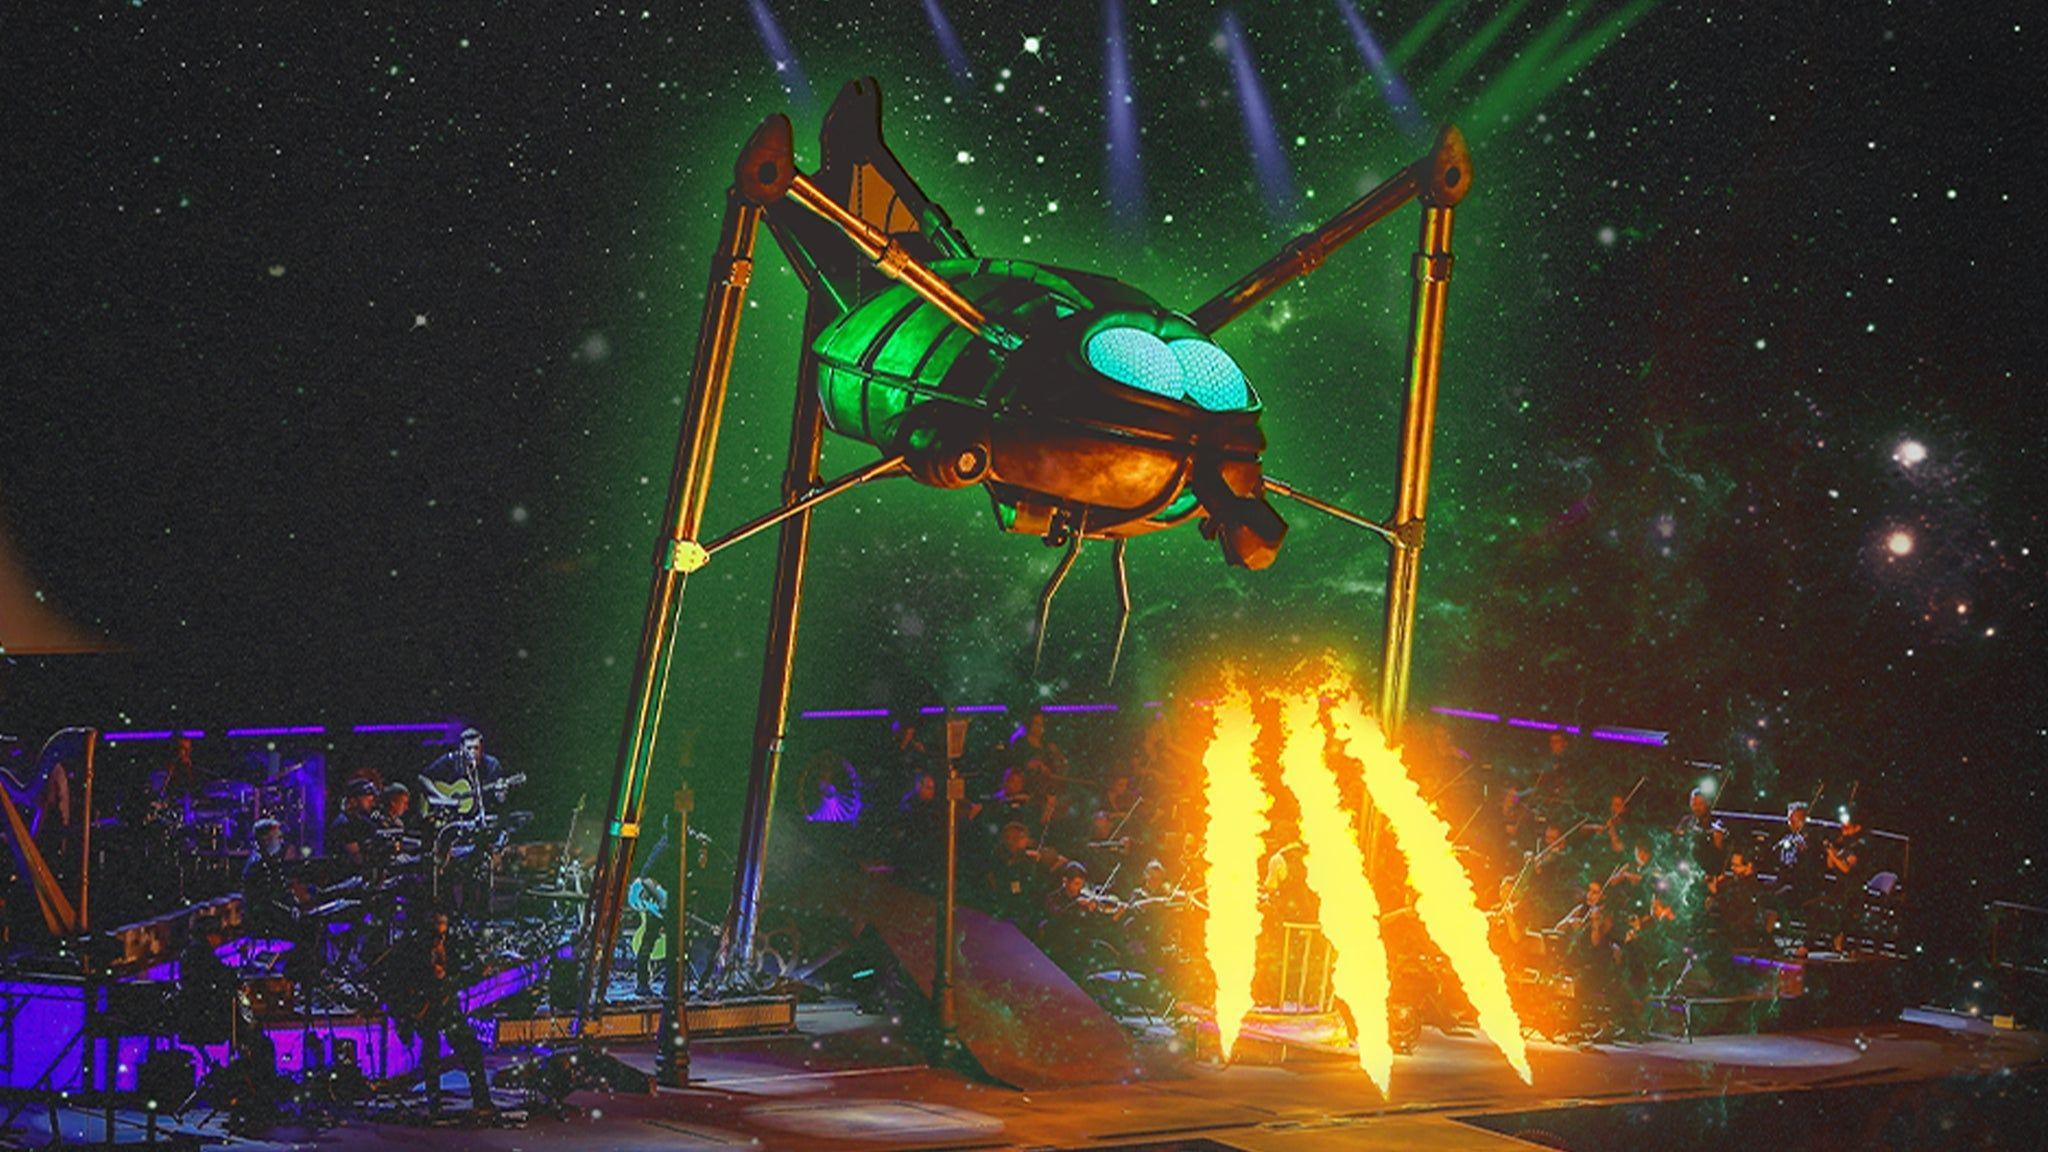 Jeff Wayne's The War Of The Worlds